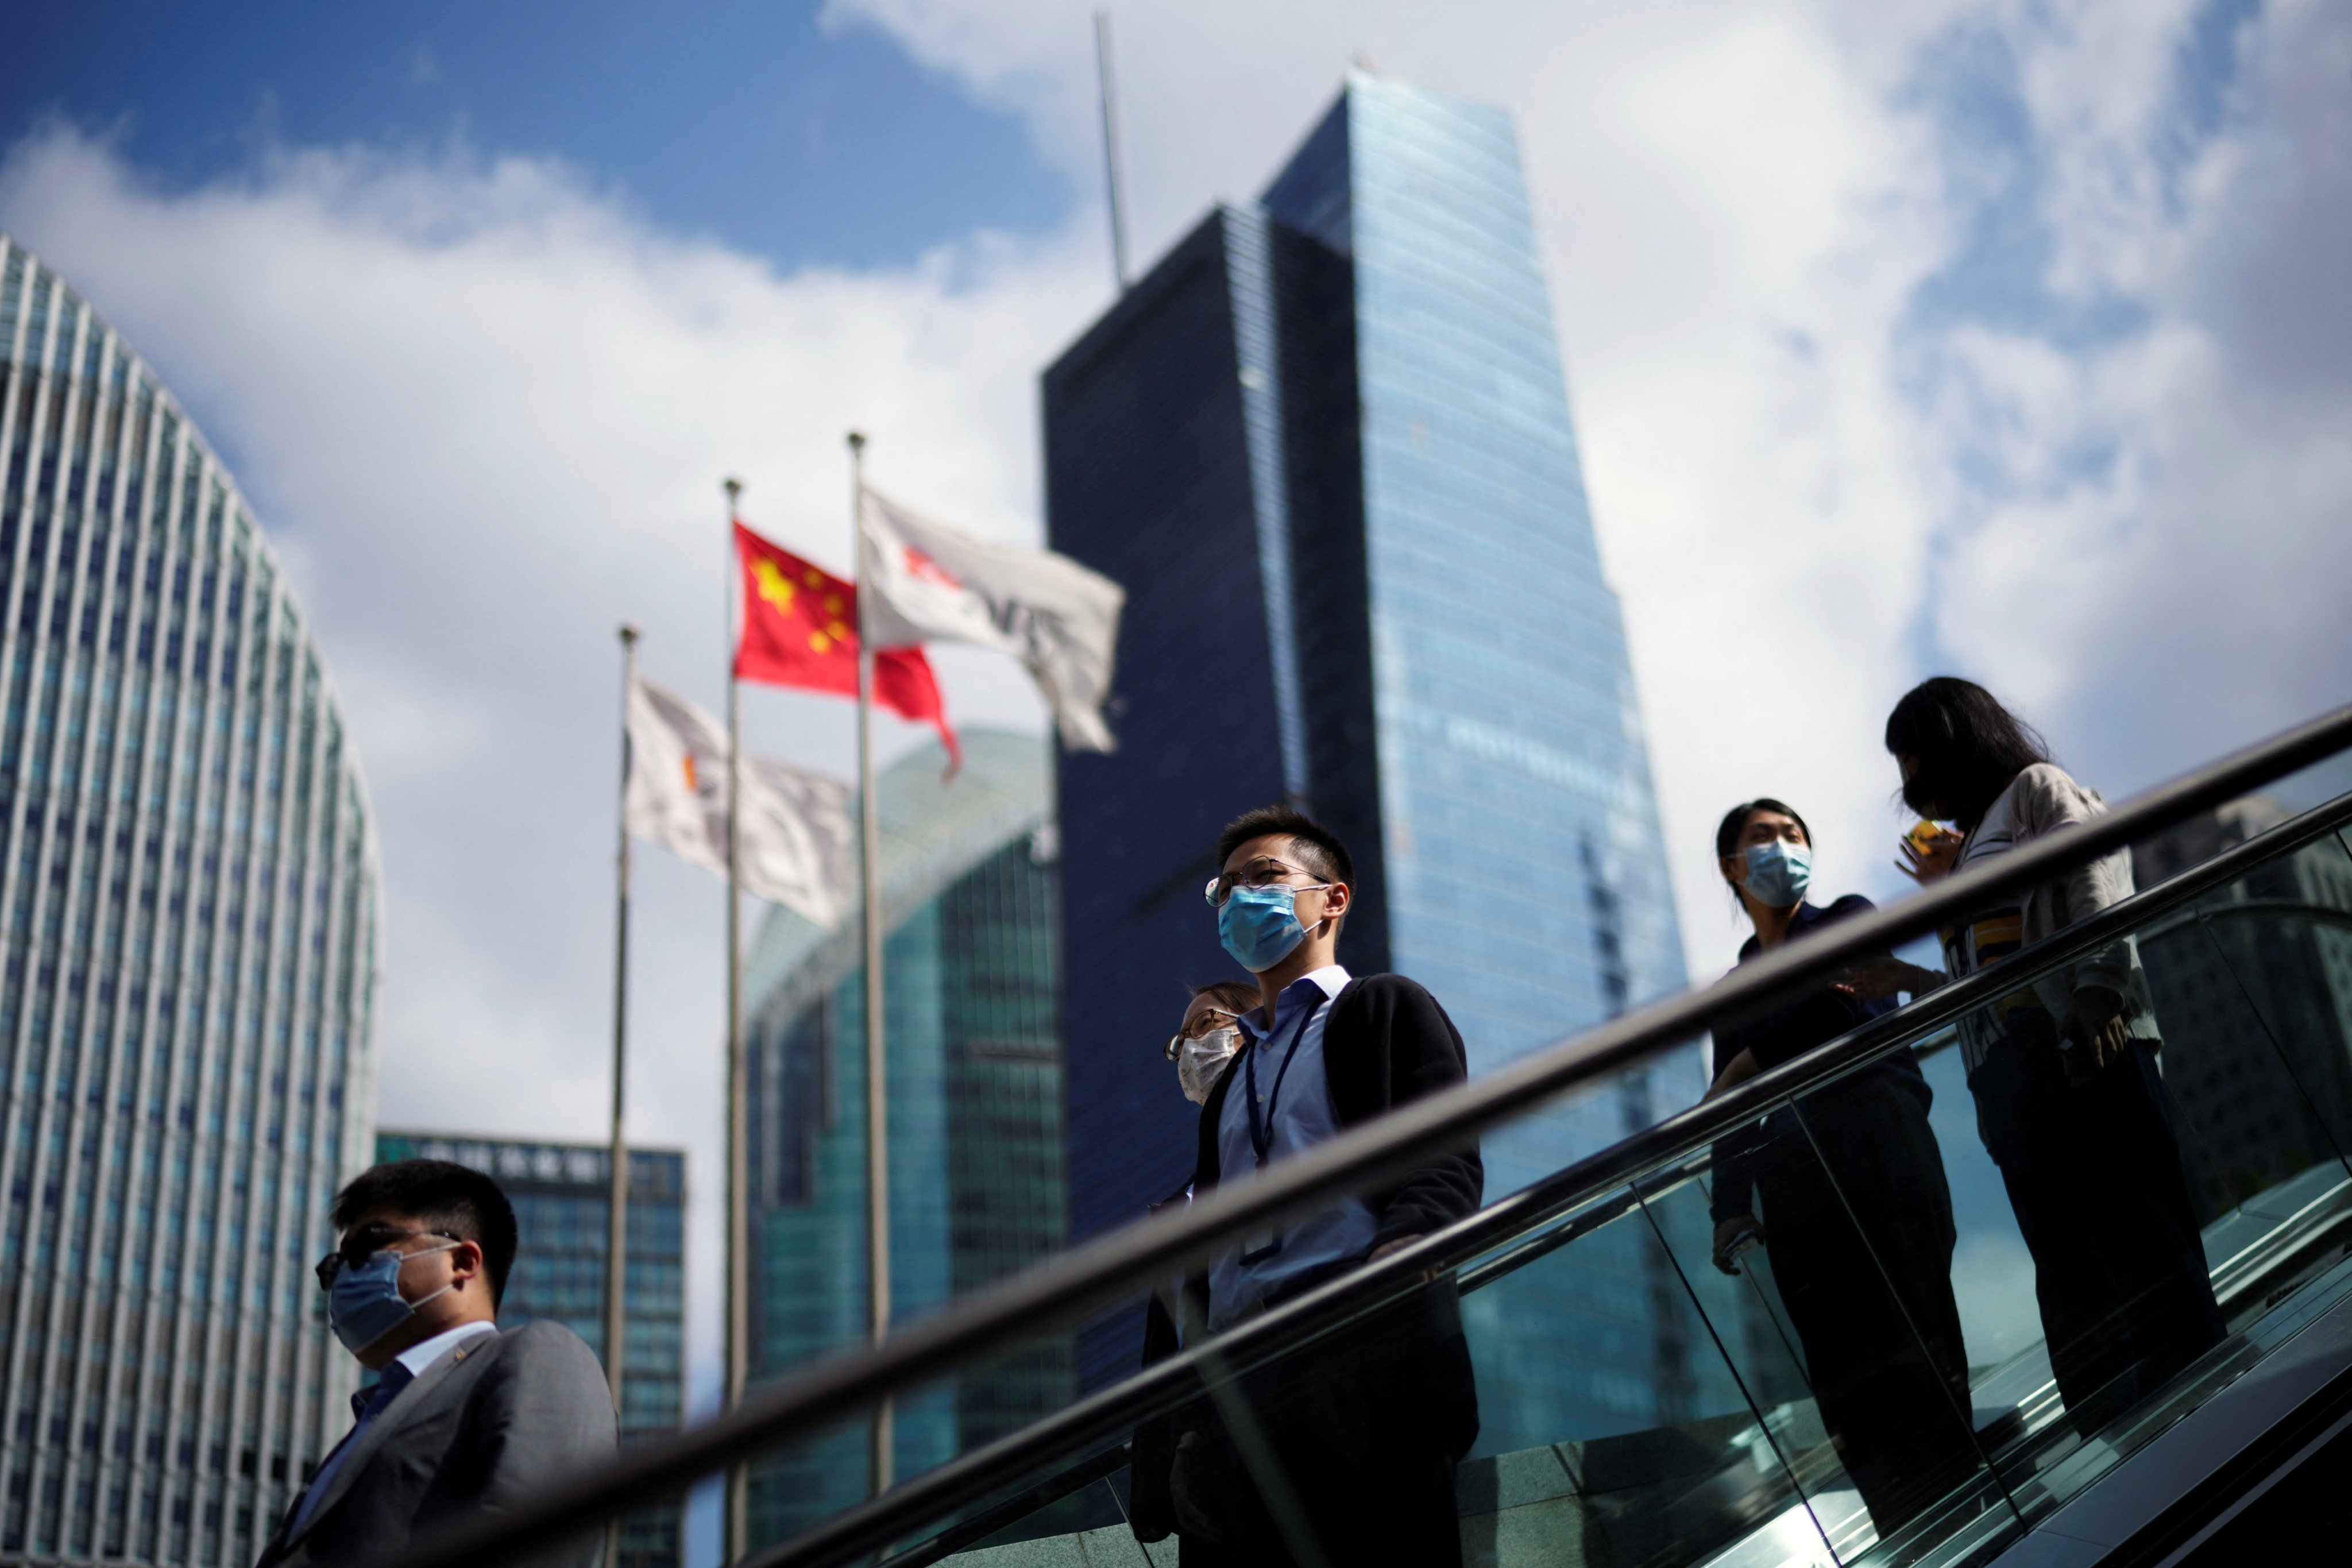 People ride an escalator past office towers in the Lujiazui financial district of Shanghai on October 17. Photo: Reuters